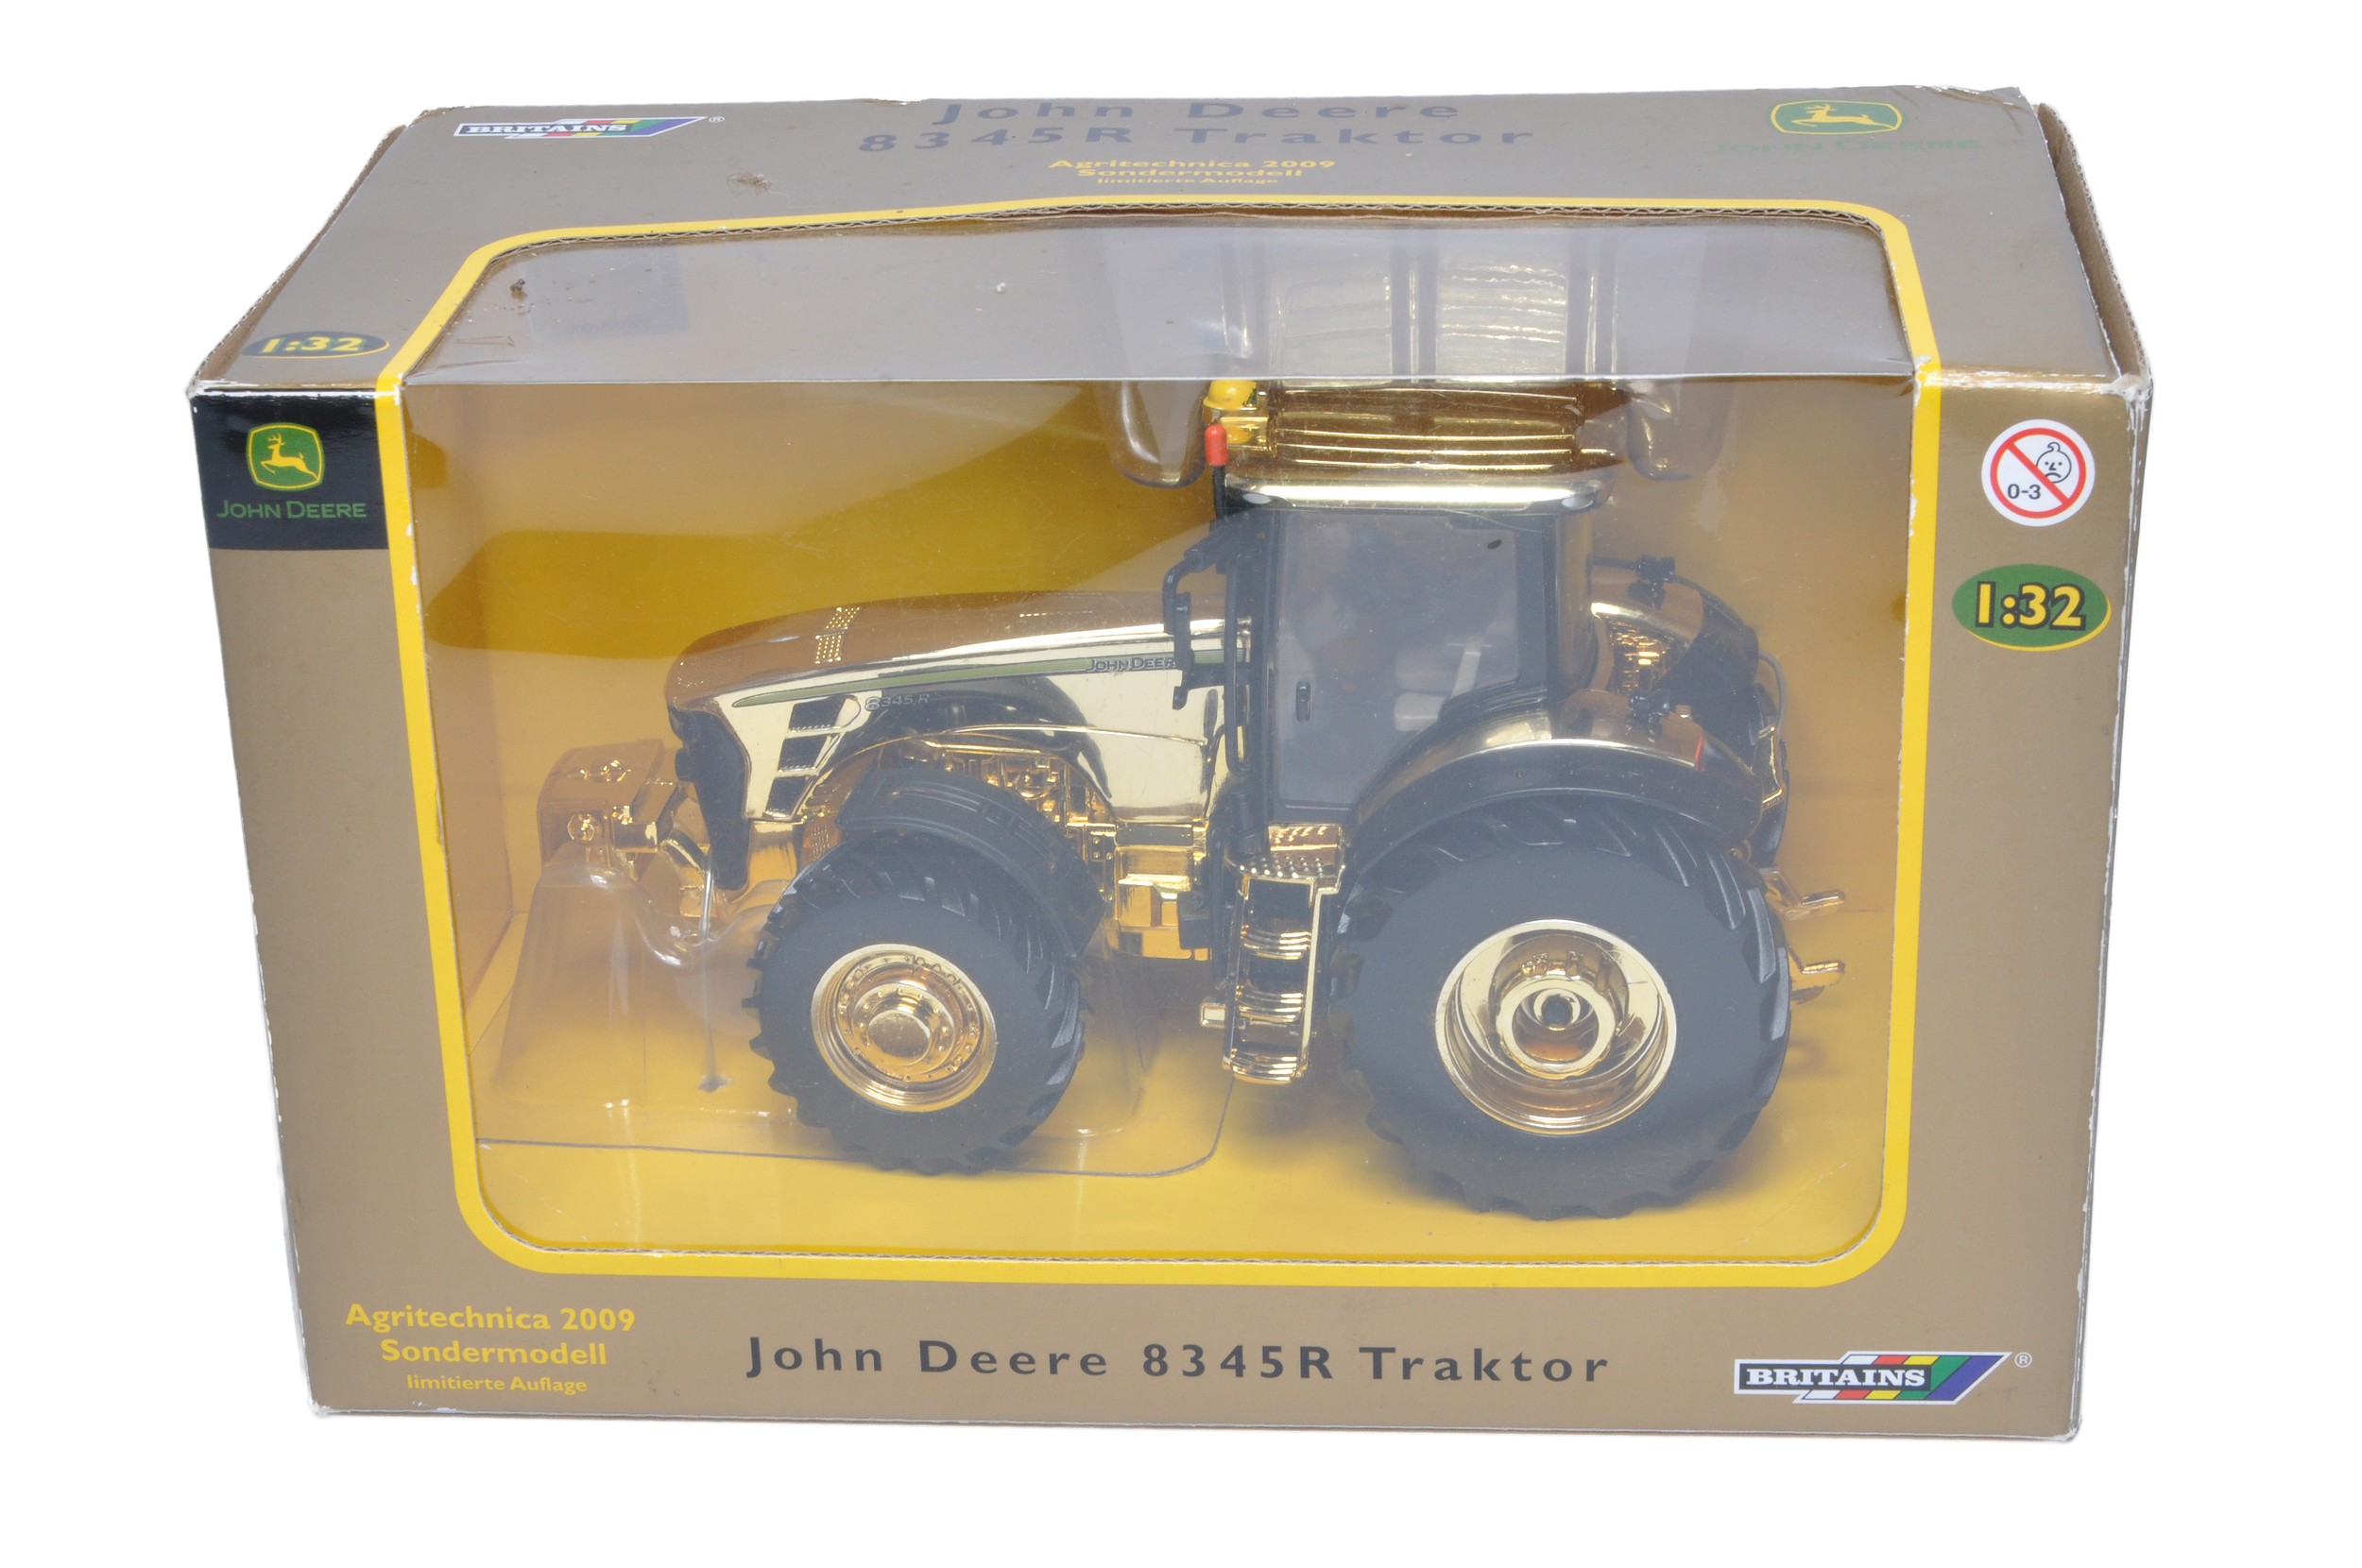 Britains Farm No. 42590 John Deere 8345R Tractor. Special Gold Edition for Agritechnica 2009. - Image 3 of 6